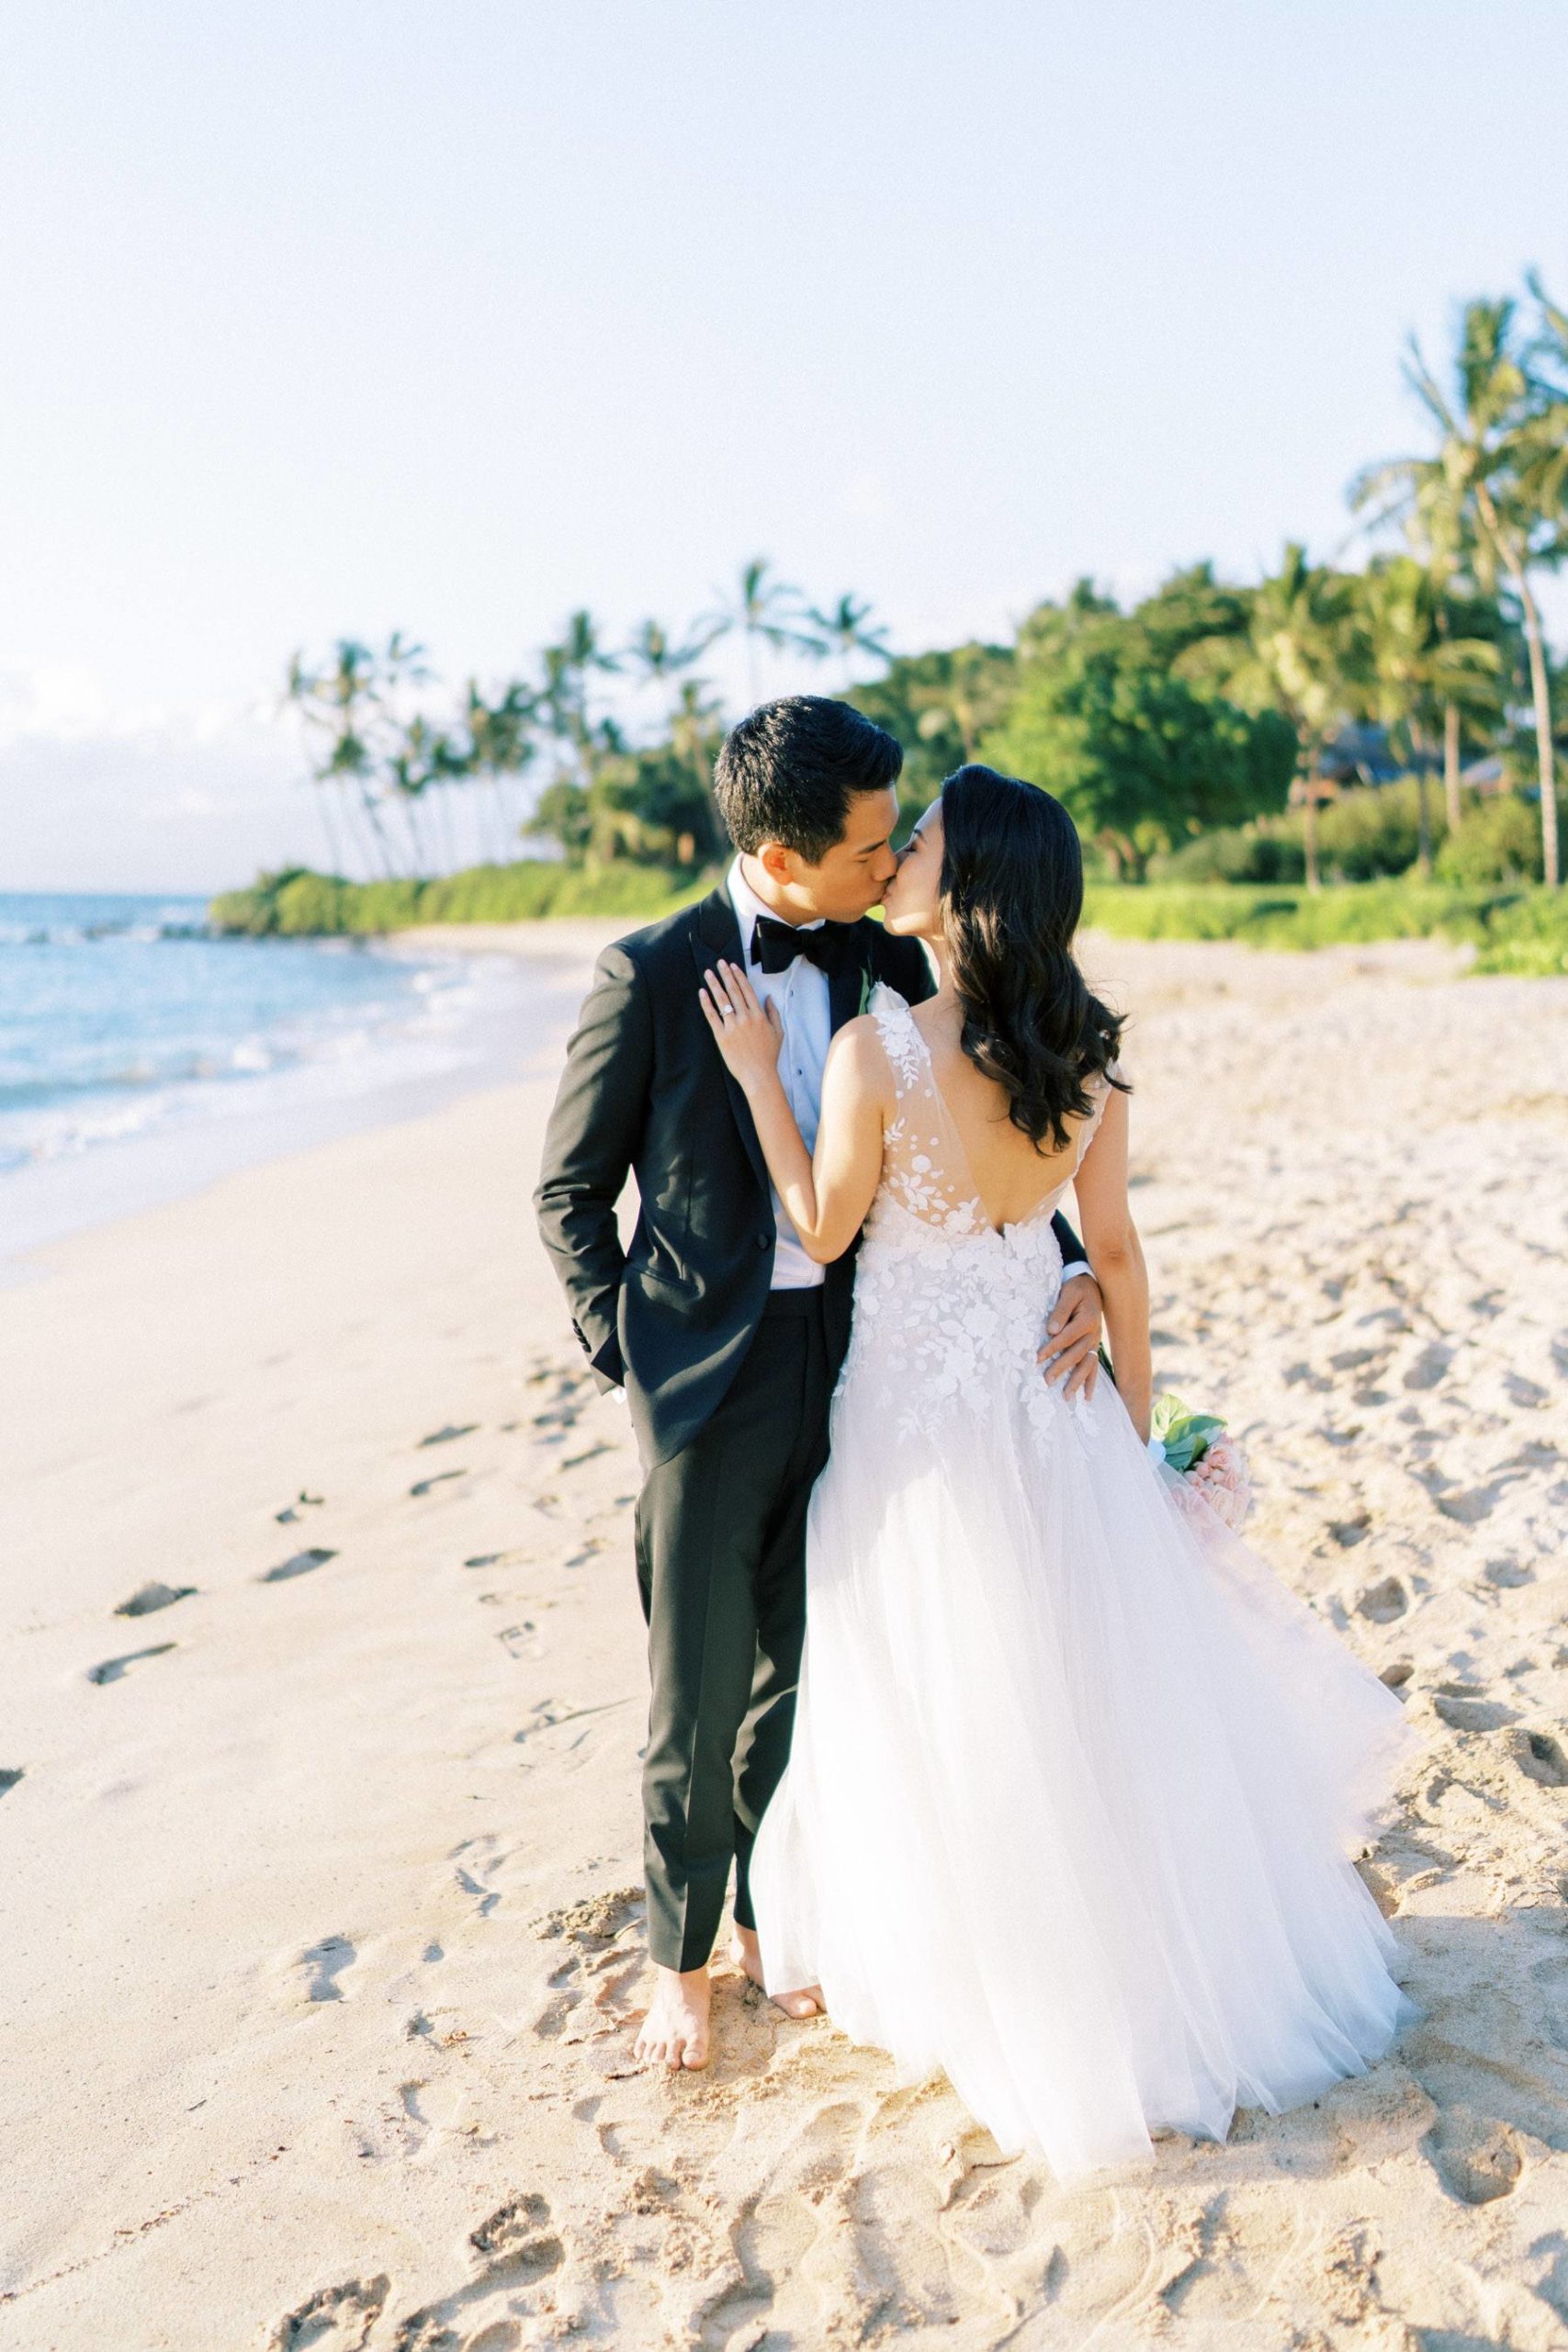 Newlyweds kissing at the beach in Hawaii